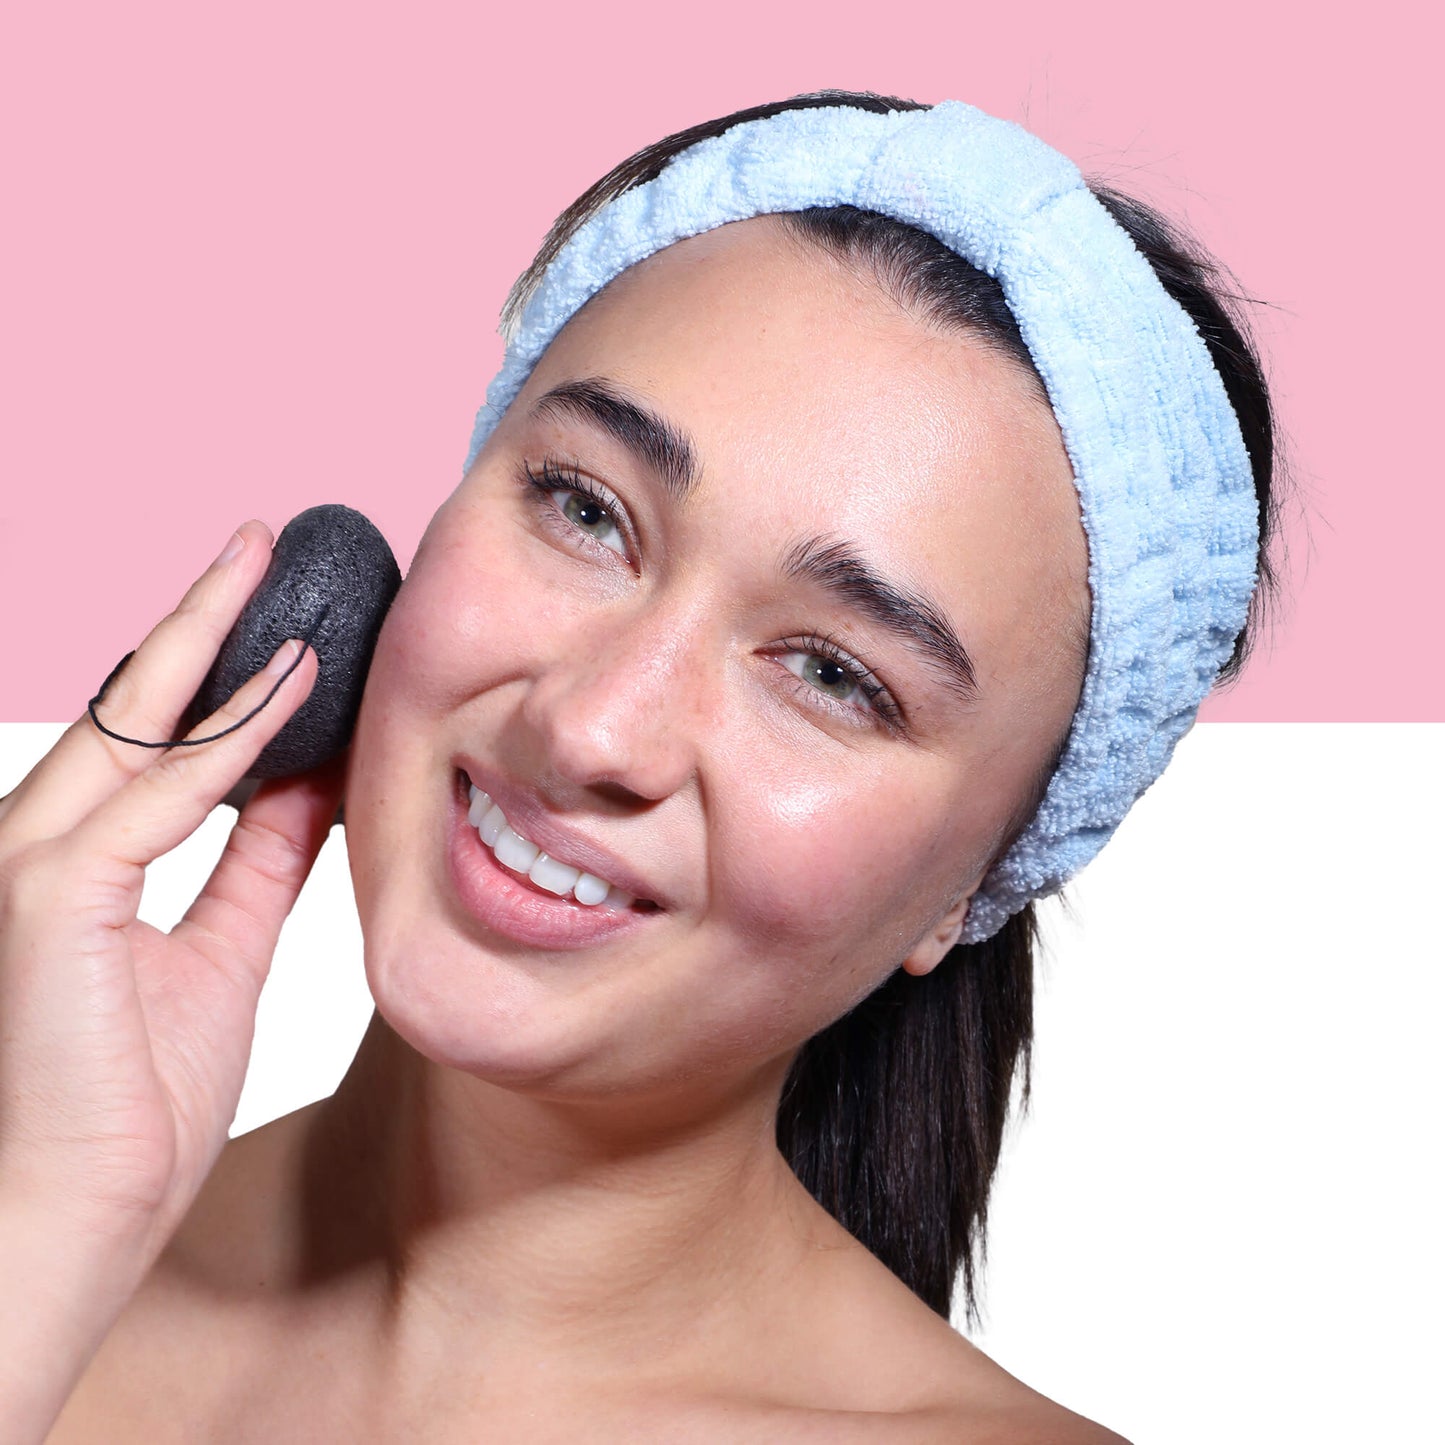 Afterspa Charcoal Konjac Sponge _ Cleansing By Detoxifying The Skin. 